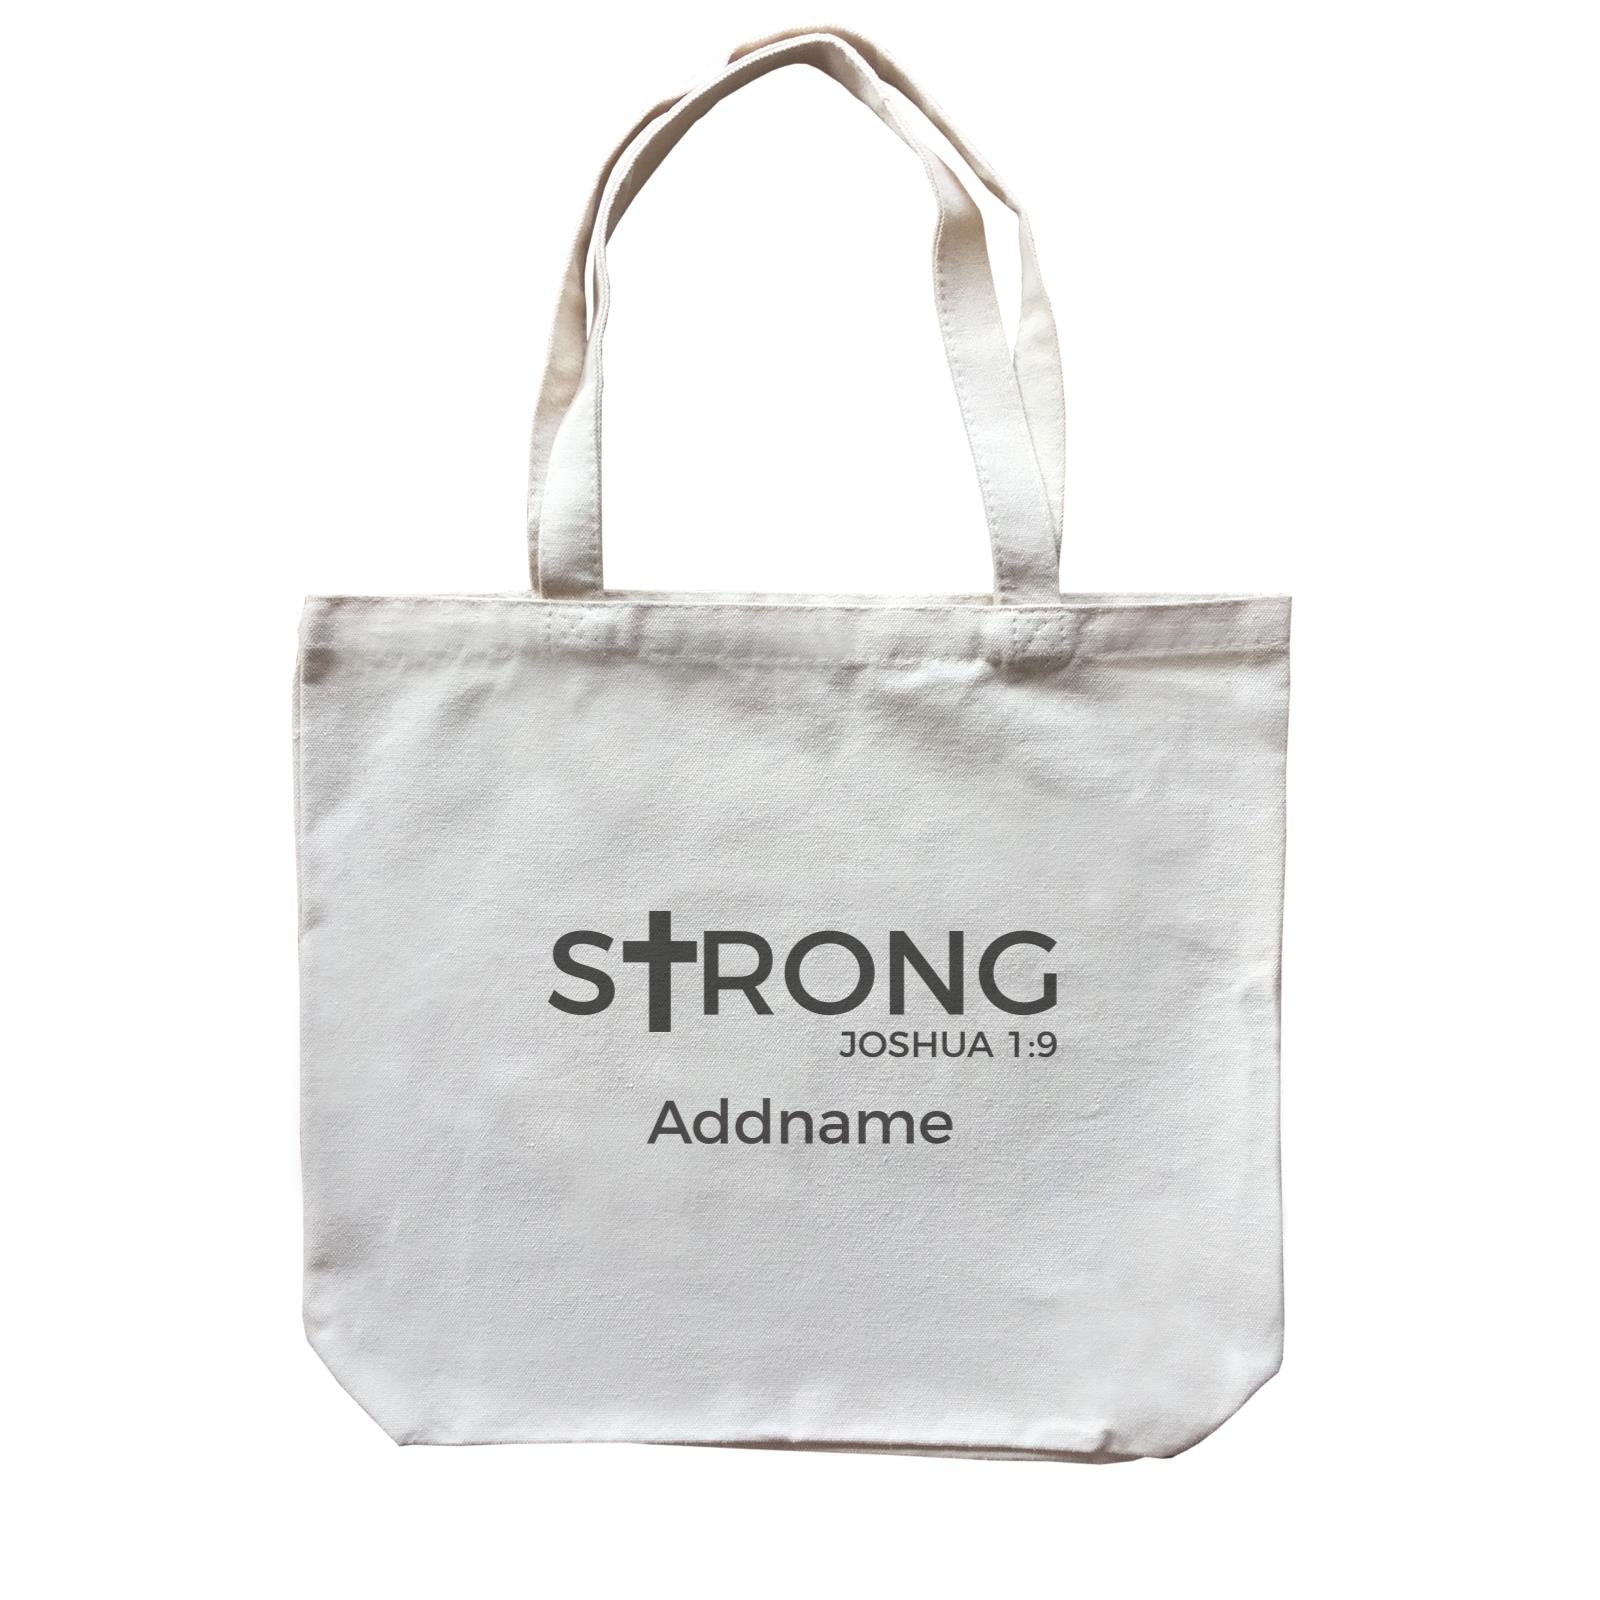 Christian Series Strong Joshua 19 Addname Accessories Canvas Bag